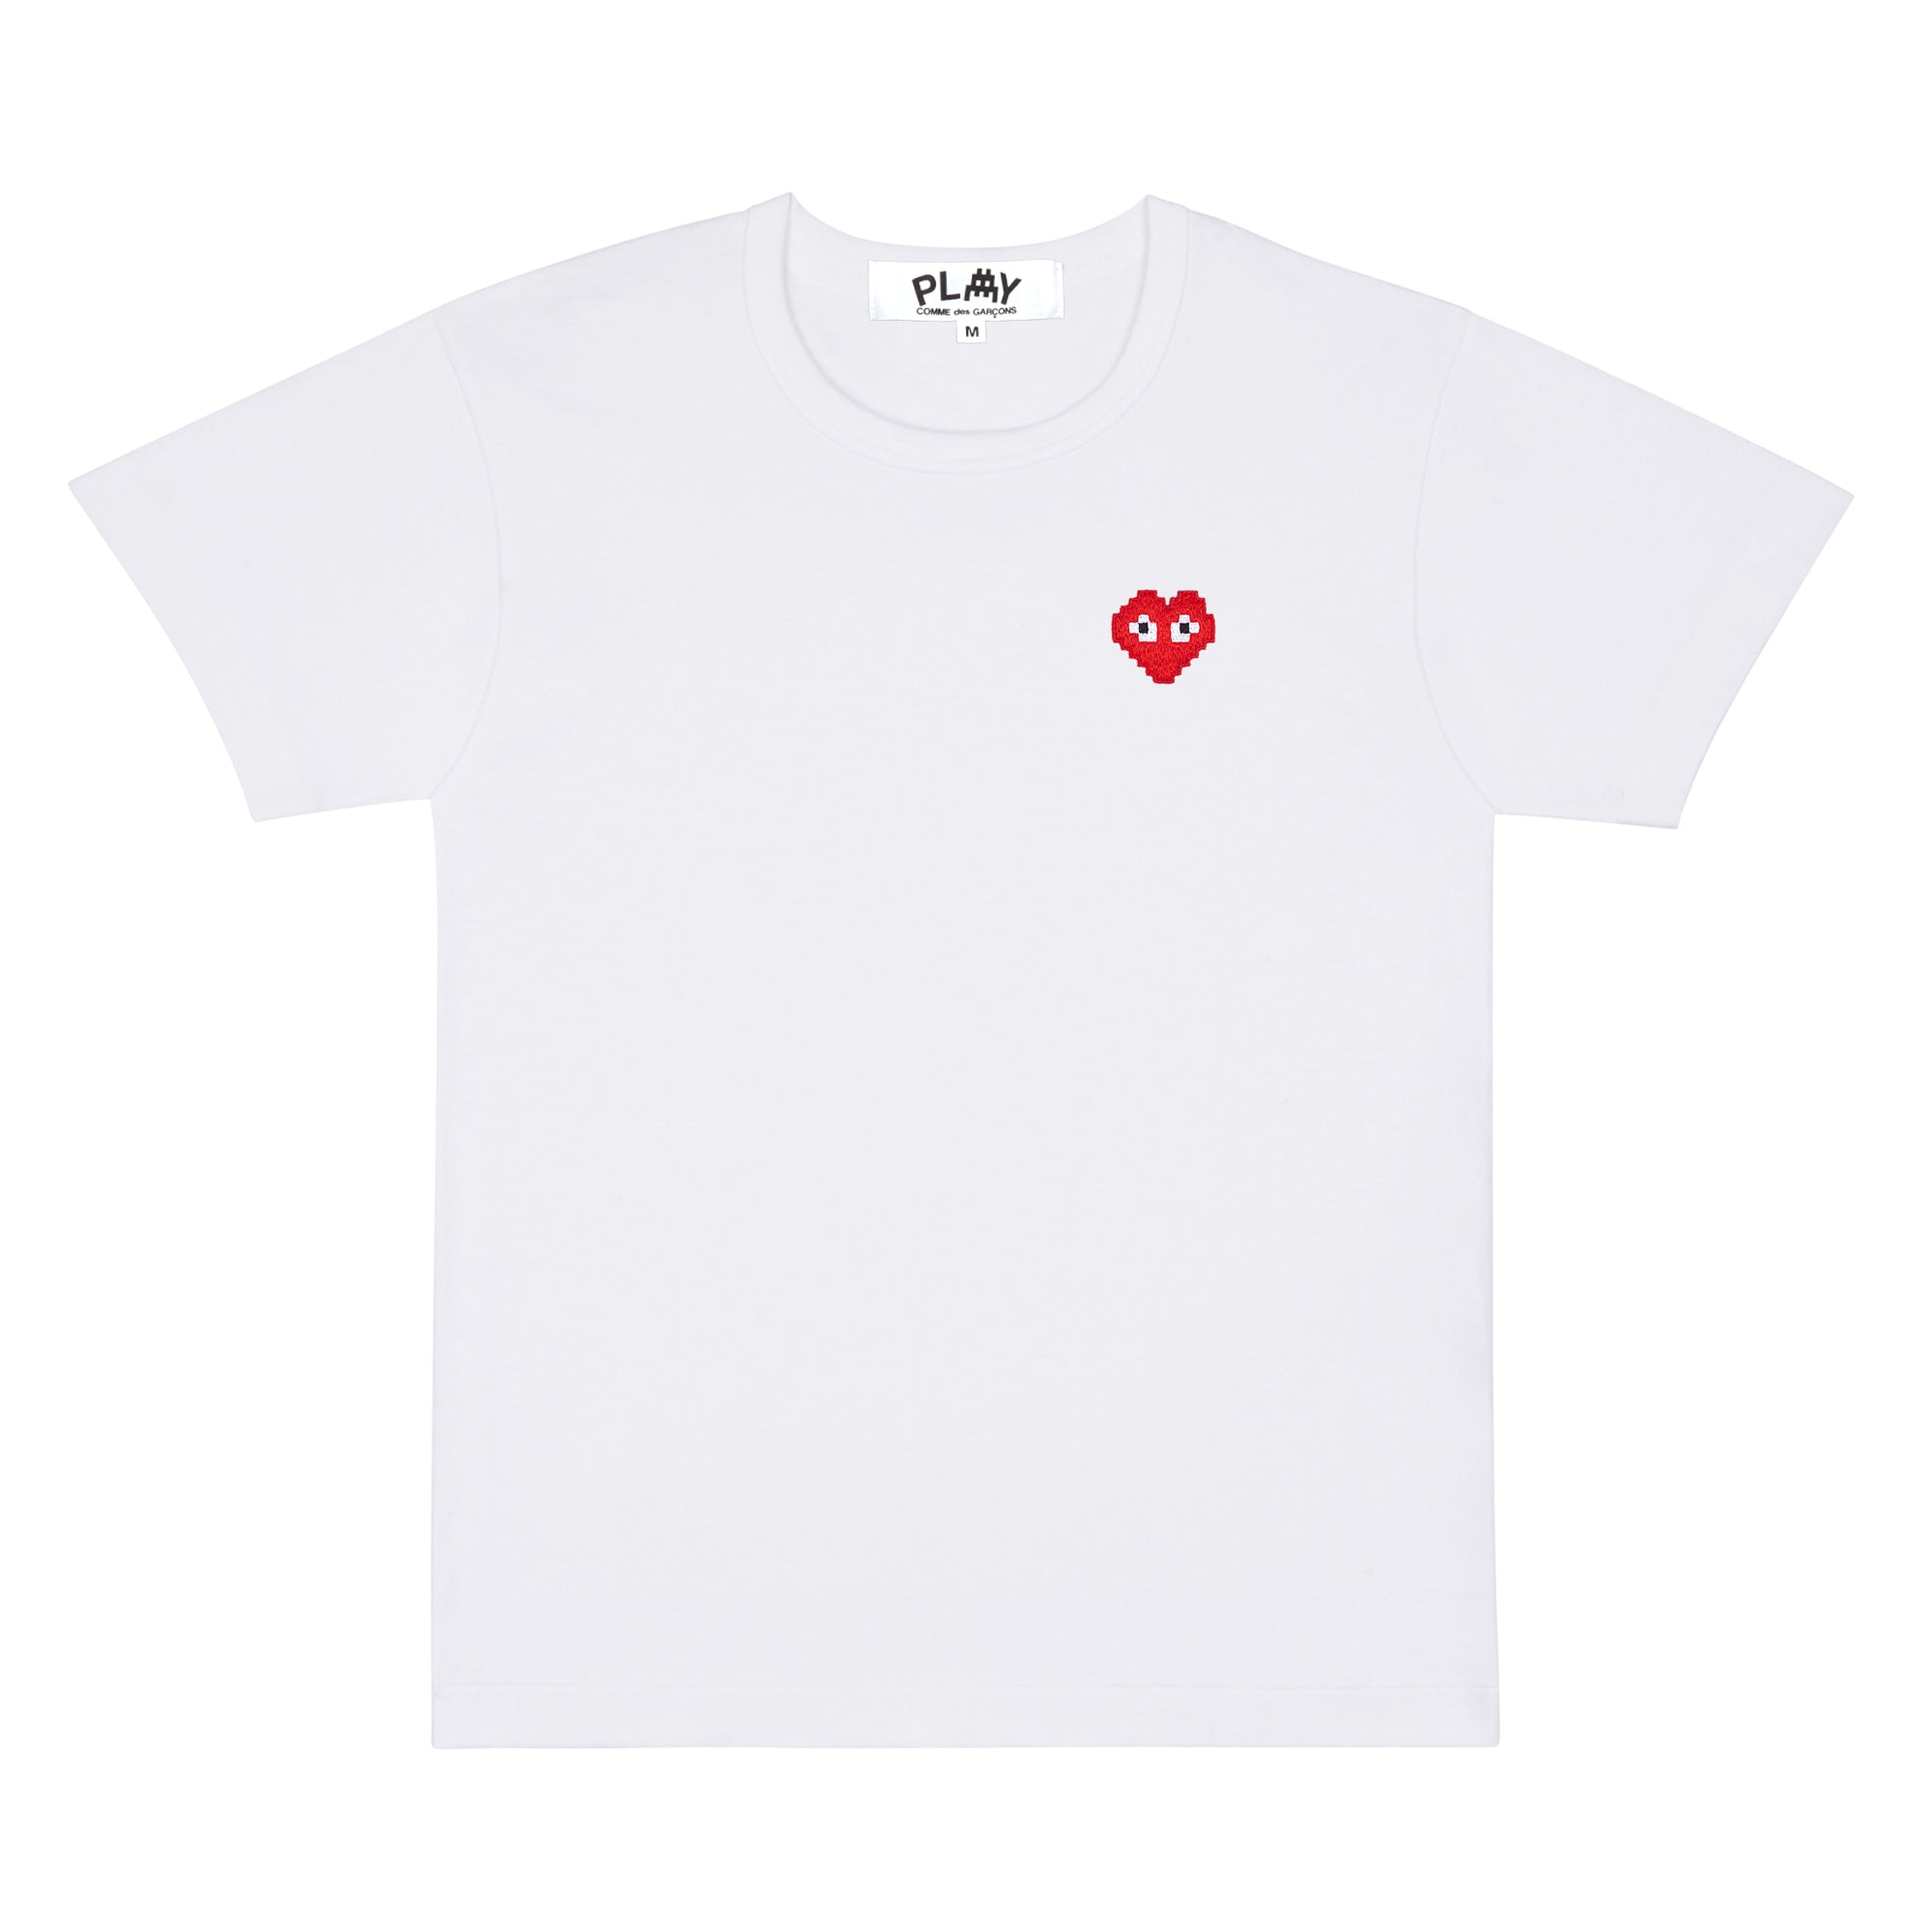 PLAY CDG - INVADER T-Shirt - (White) view 1